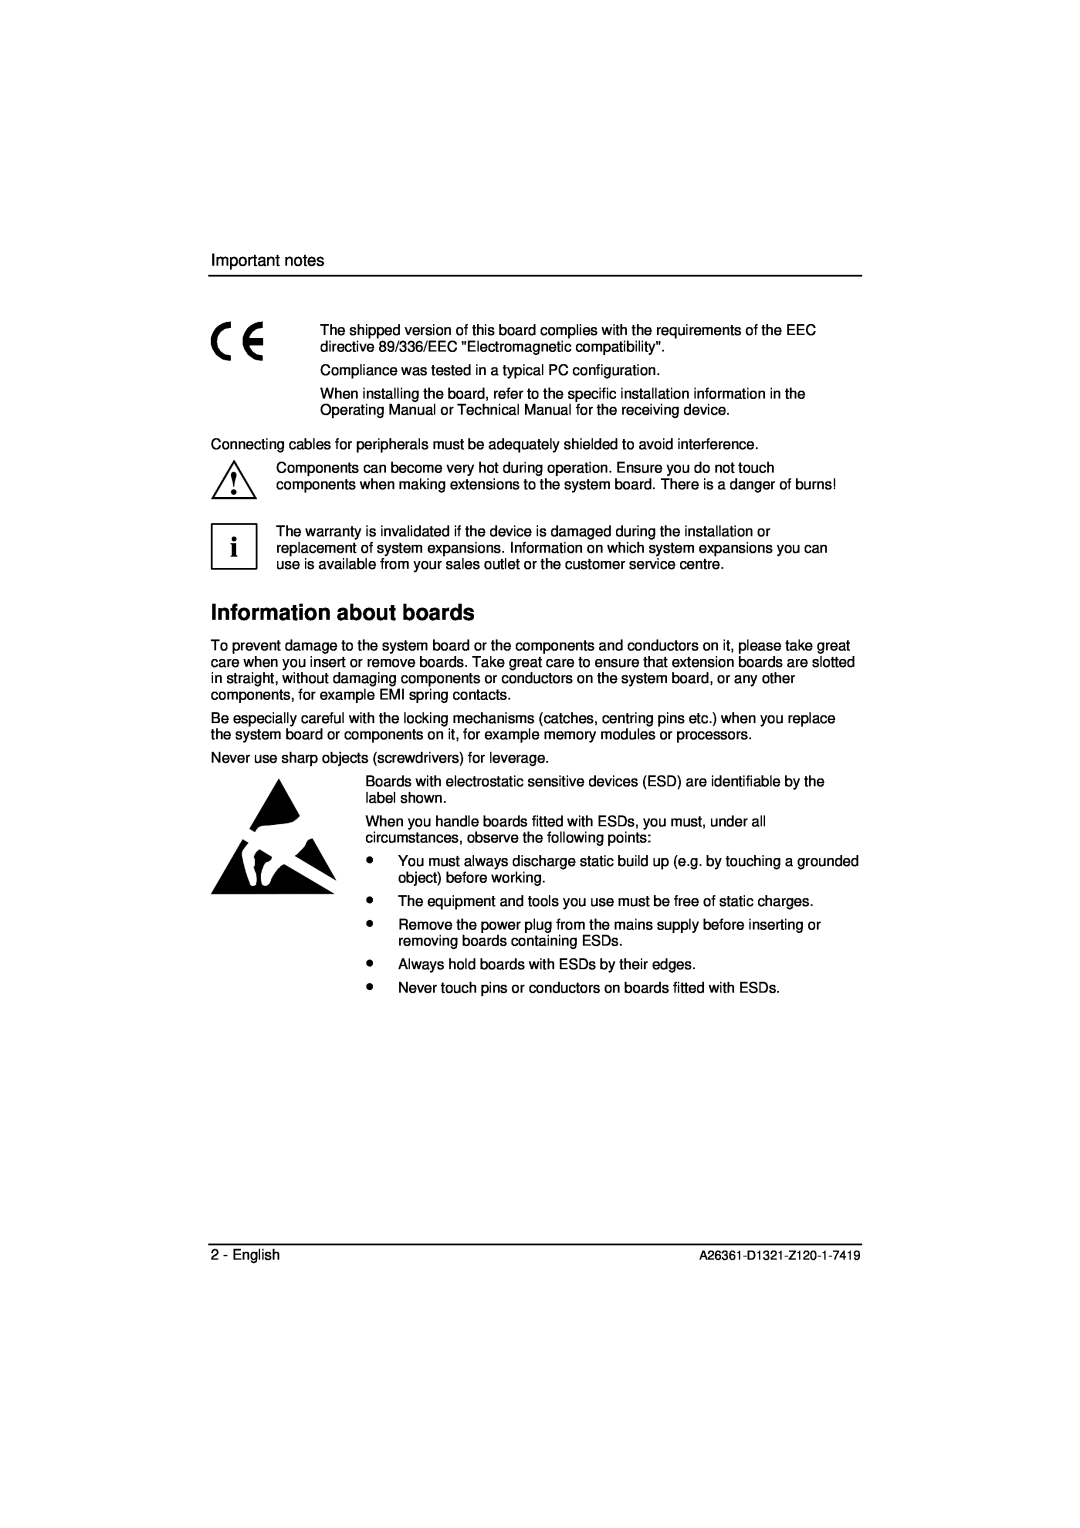 Fujitsu D1321 technical manual Information about boards, Important notes 